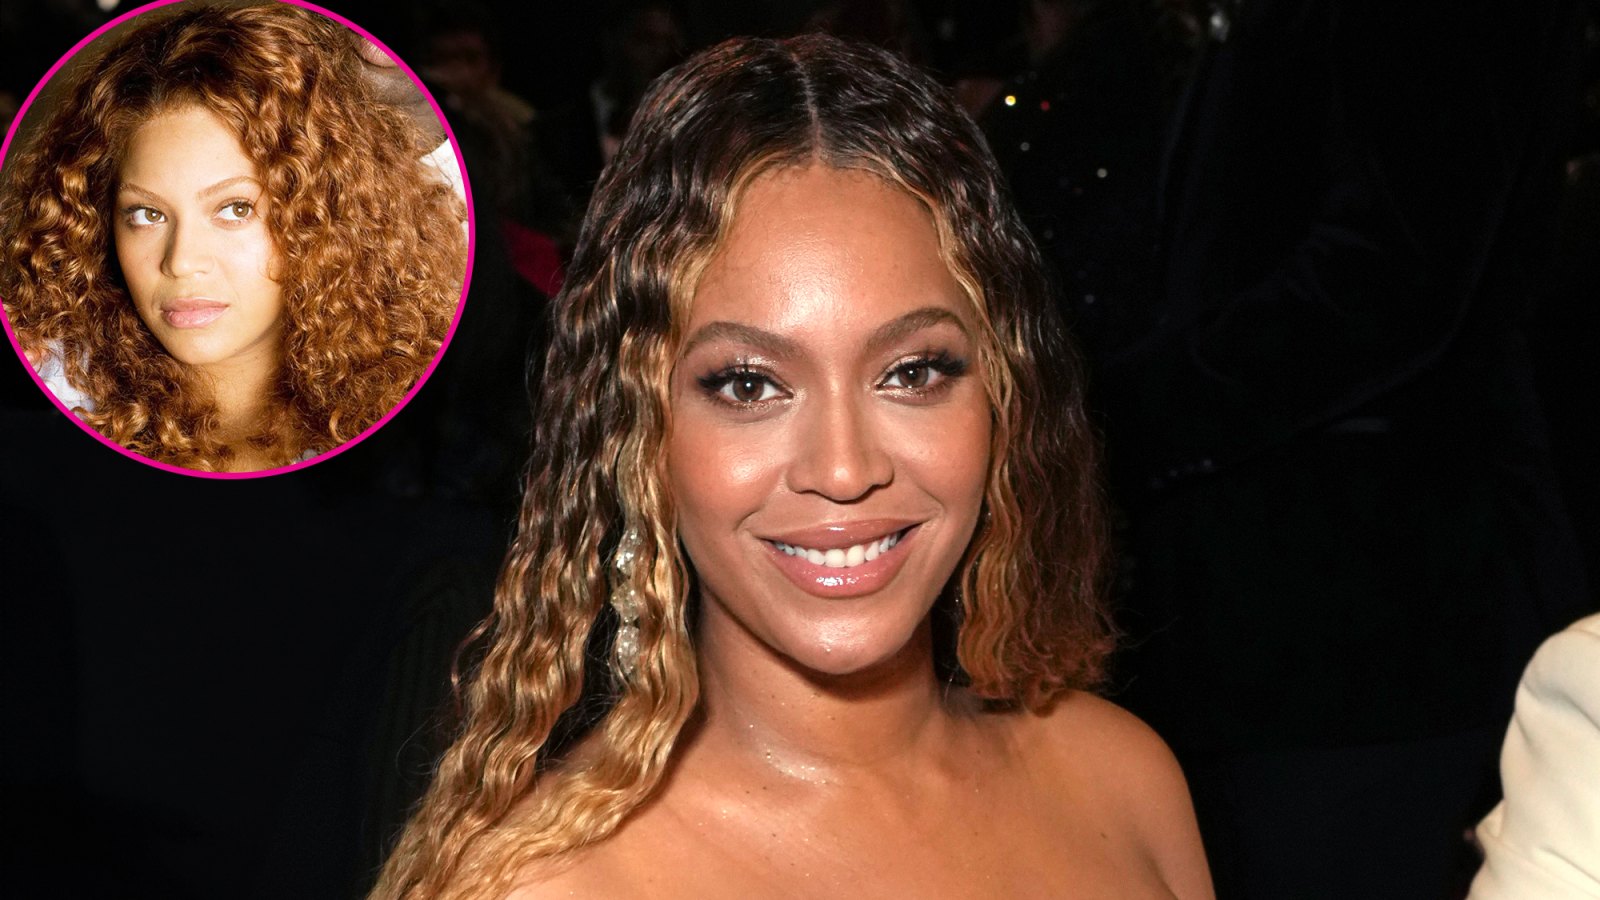 Beyonce's Red Hair on CR Fashion Book Cover Is Reminding Fans of Her Obsessed Character